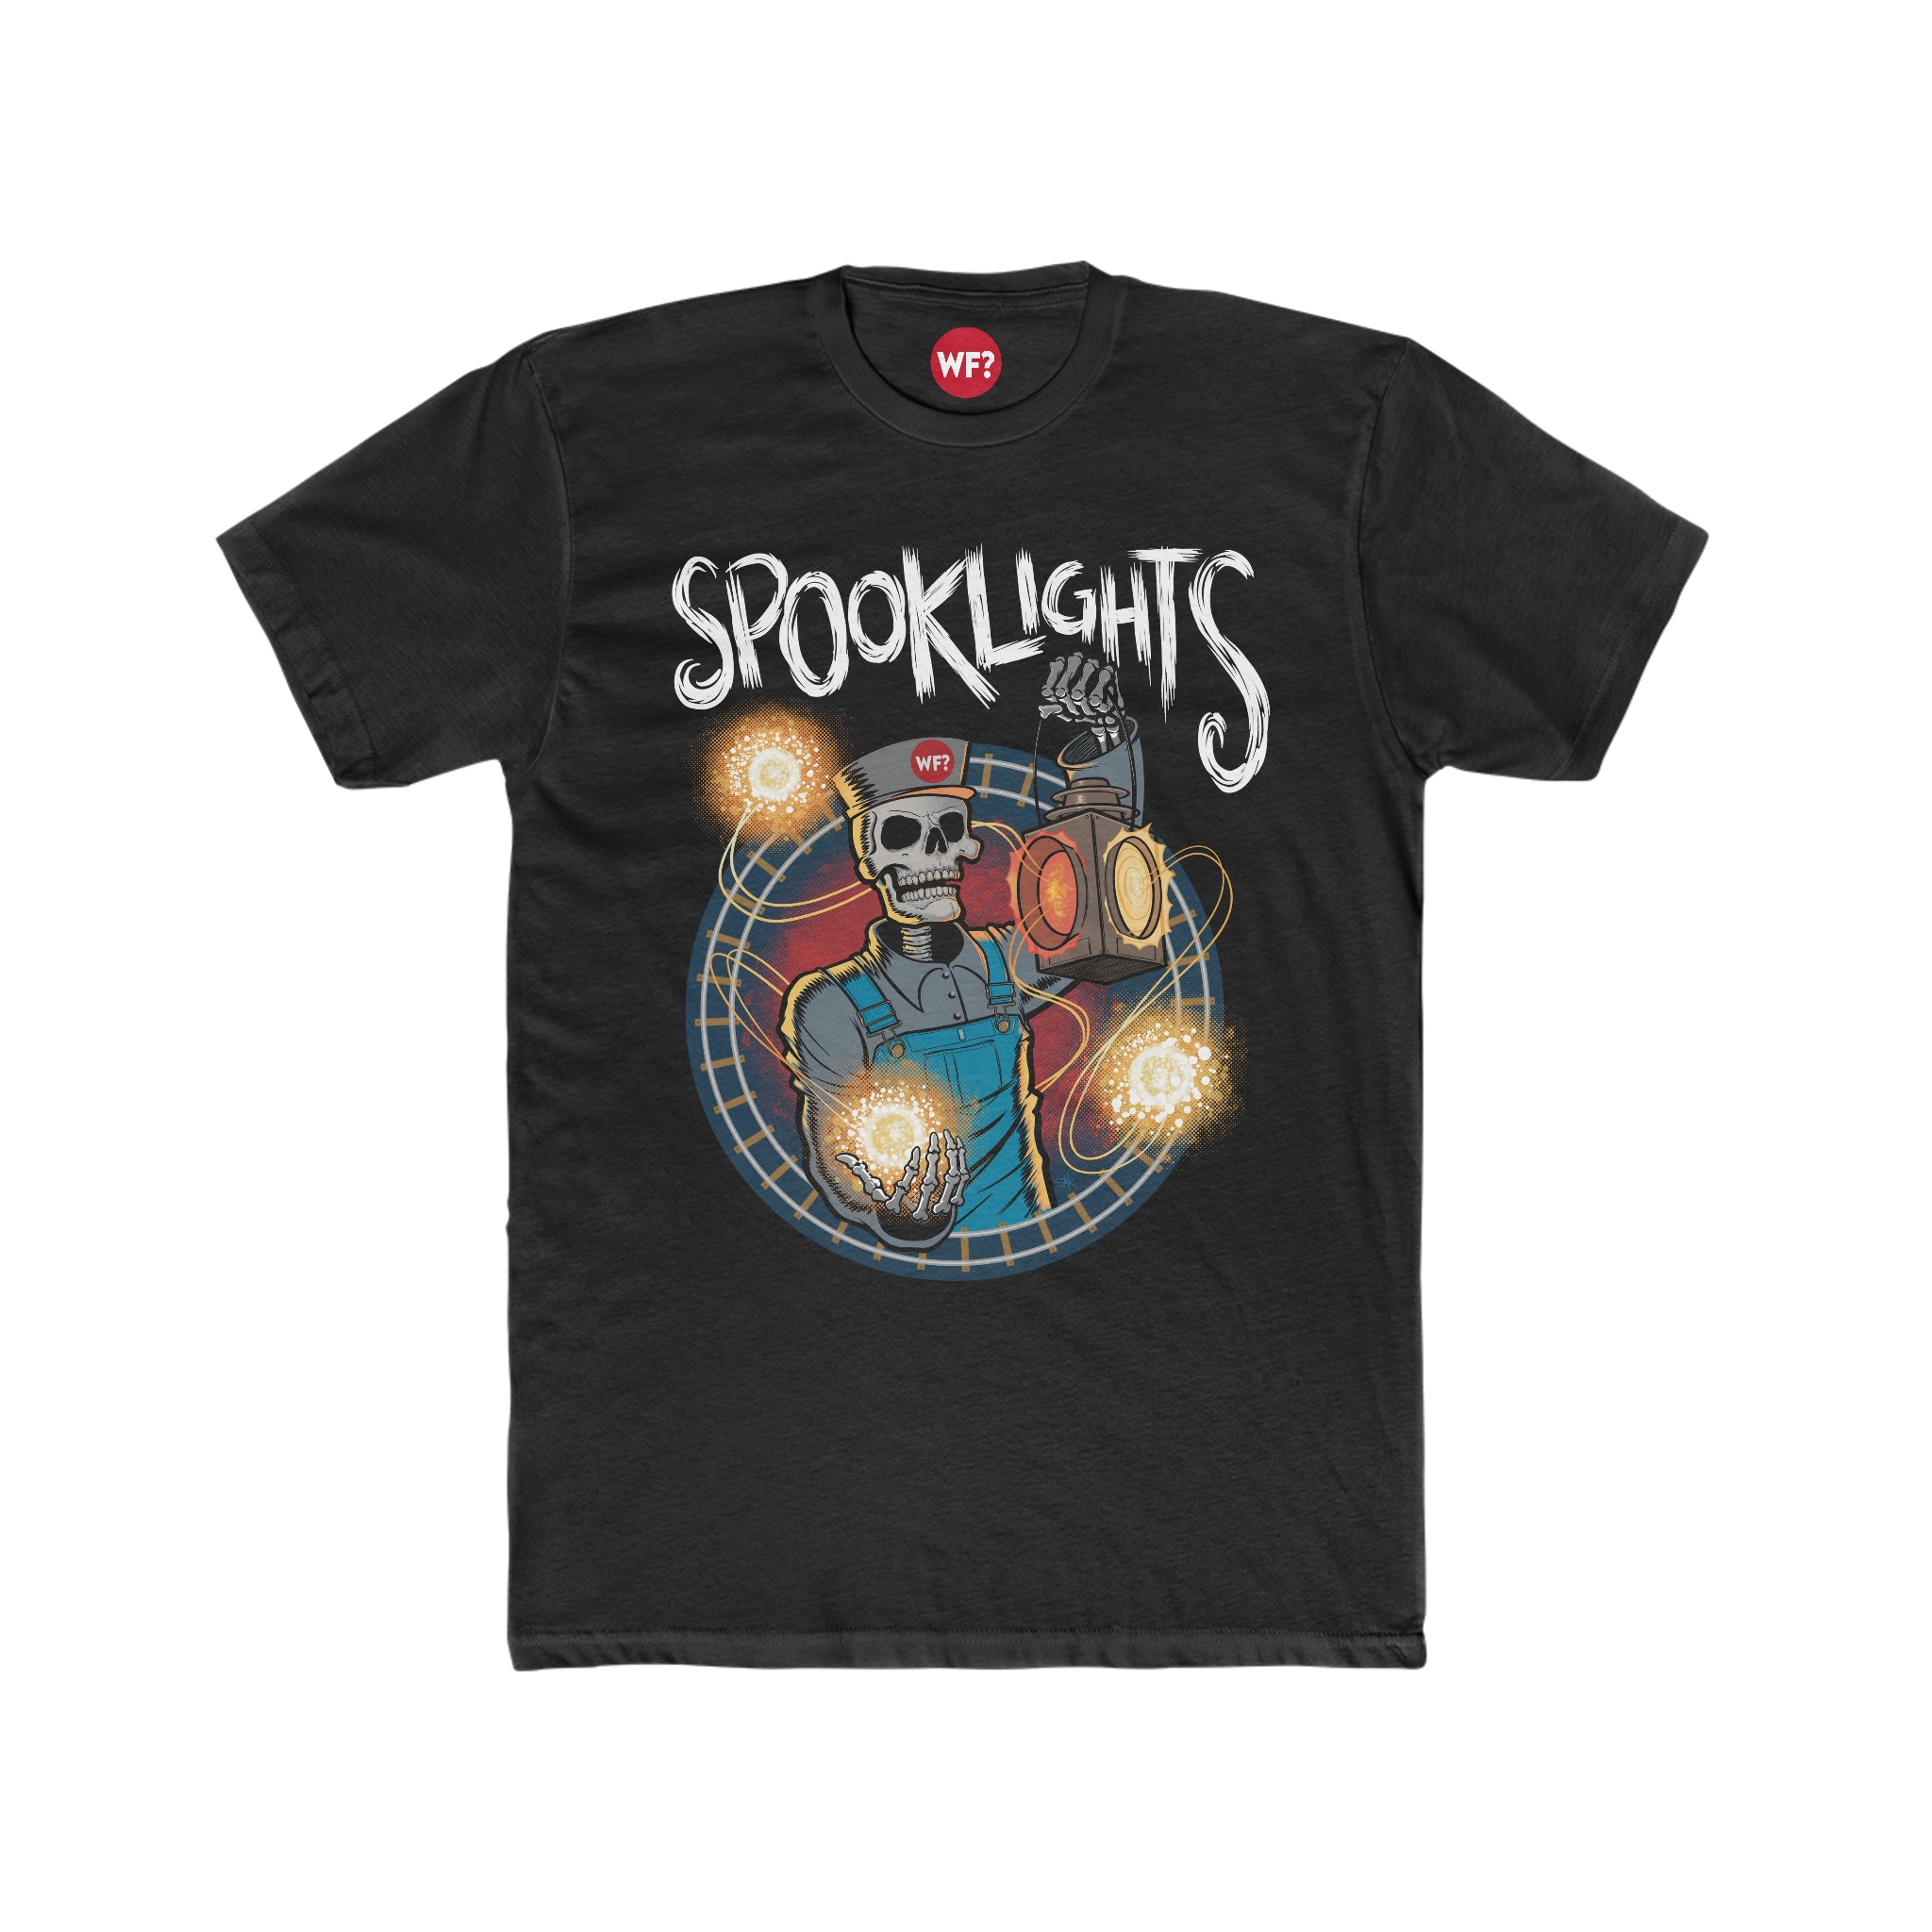 Spooklights Limited T-Shirt